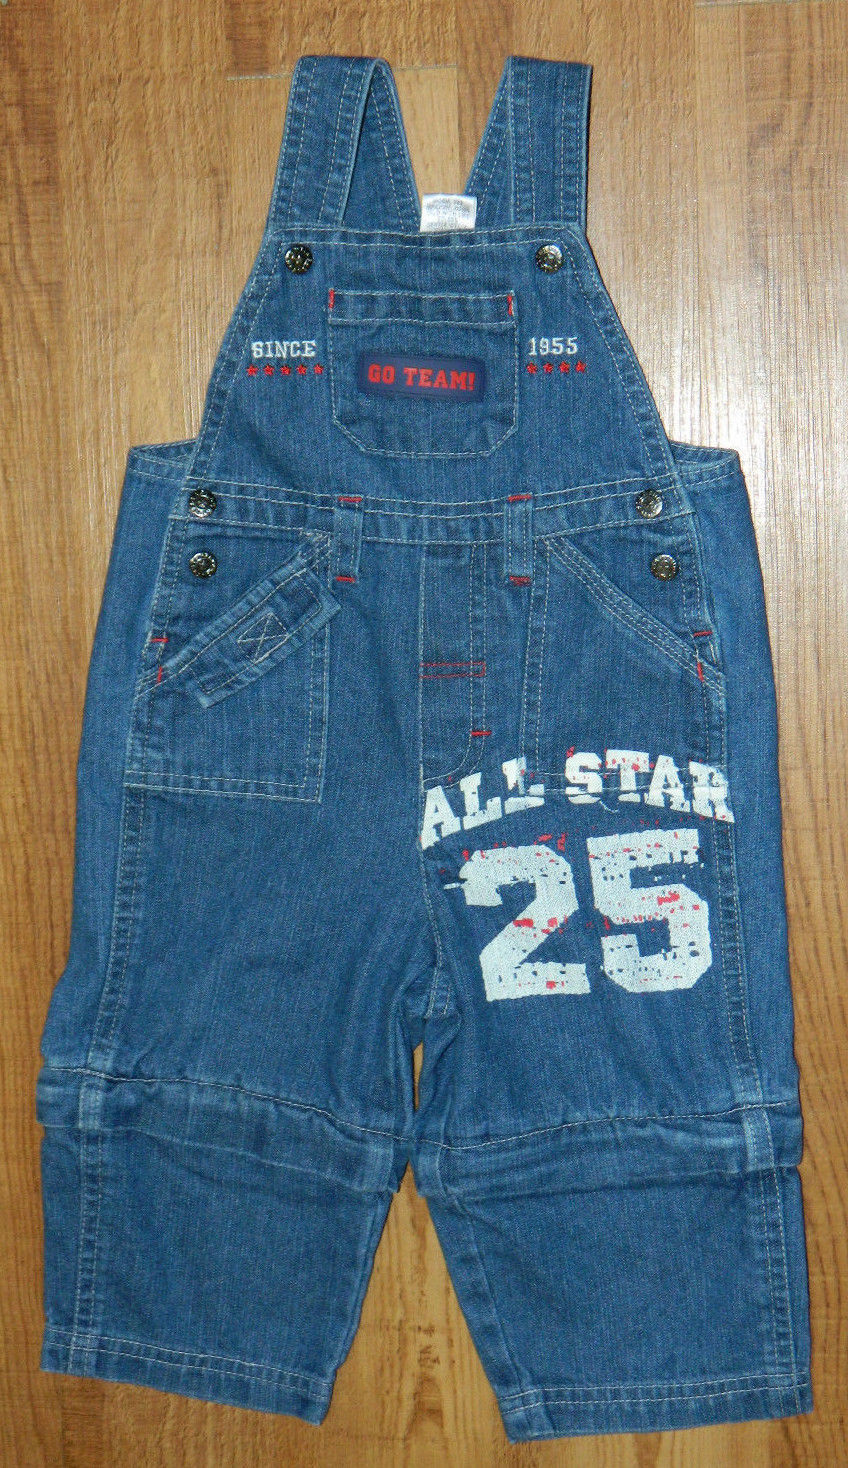 Infants Boys Starting Out Brand Denim Overalls and Shorts size 12 months / 20x9 - $12.16